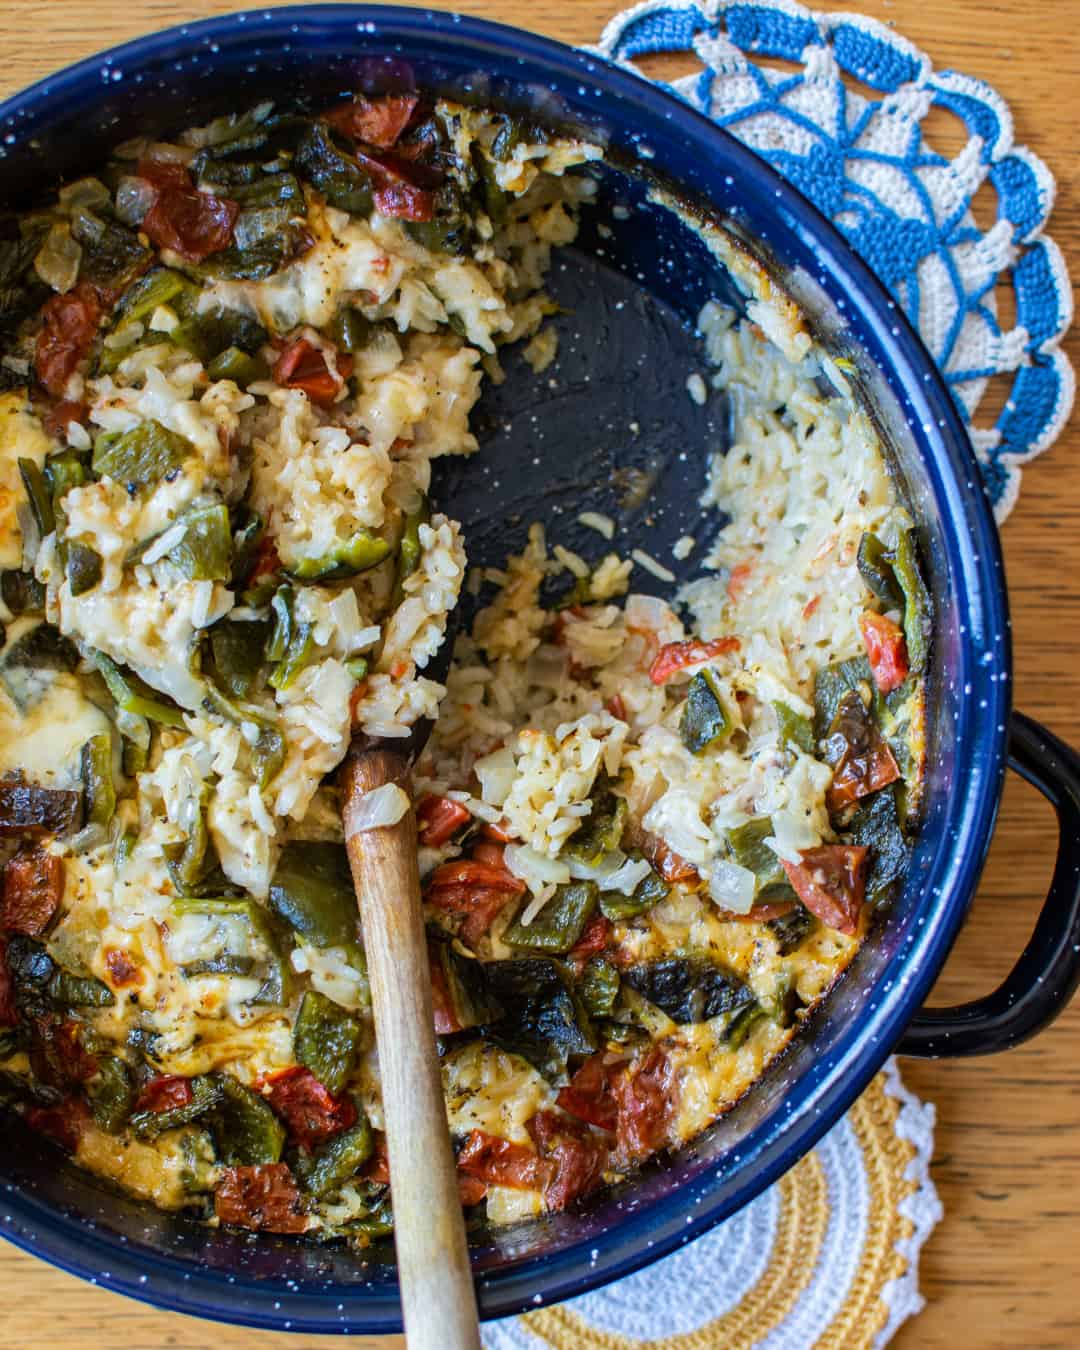 One-Pot Cheesy Rice Chile Relleno Casserole from Kate Ramos of Hola Jalapeno